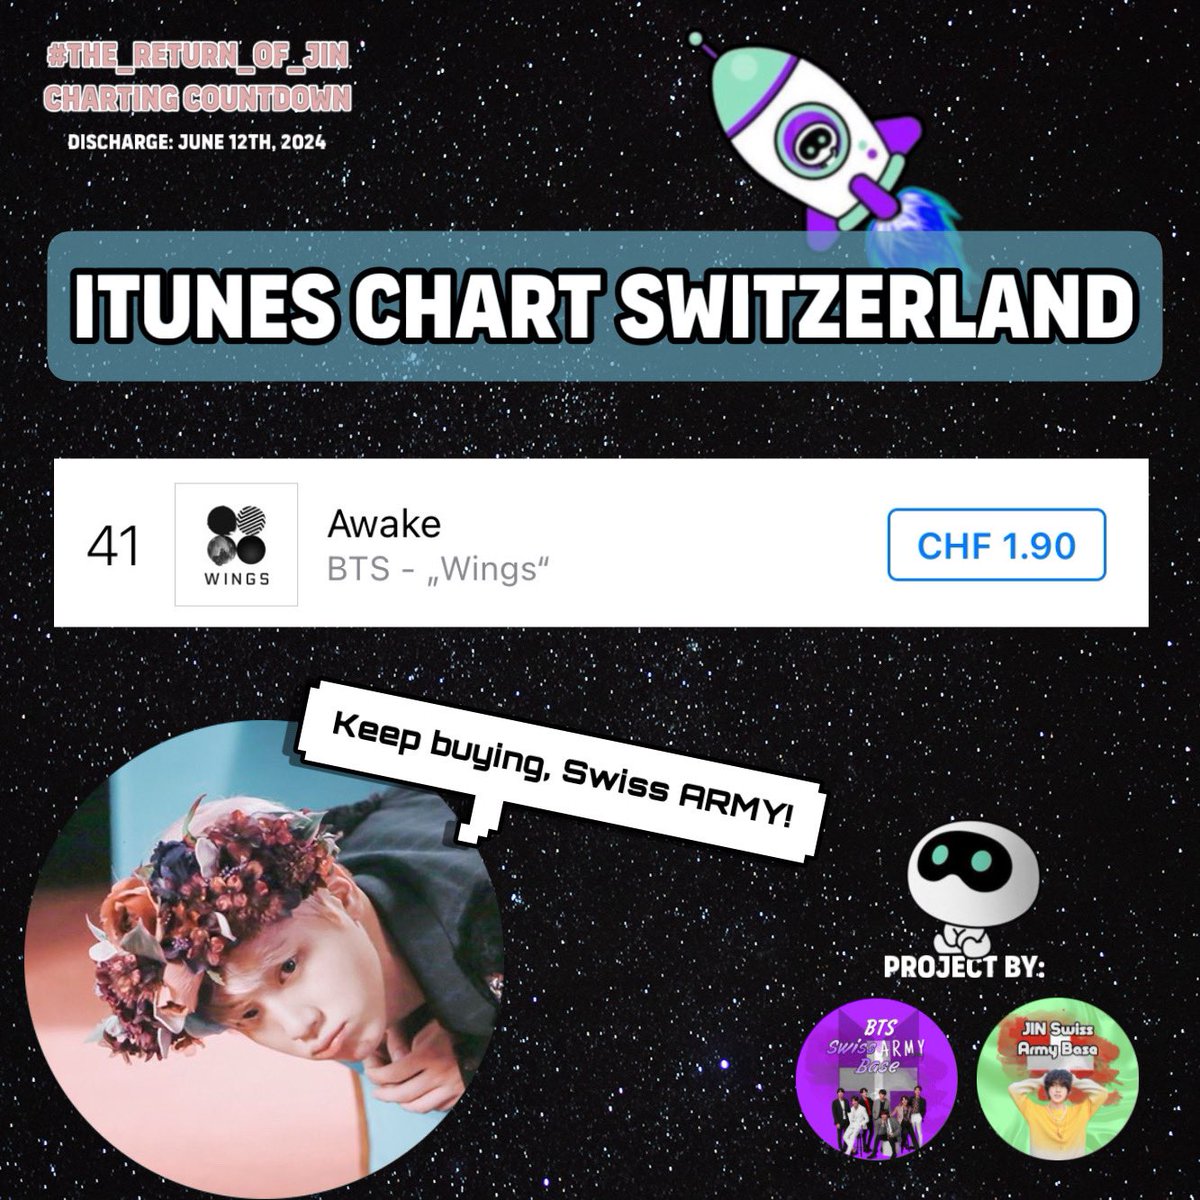 🌹[iTunes Charts Switzerland]🌹 Swiss ARMY! Currently #Awake by #Jin is currently charting at #41 on the Swiss iTunes Chart! Let’s get to #1!💪 #TheReturnOfJin #AwakeTo1_inSwitzerland